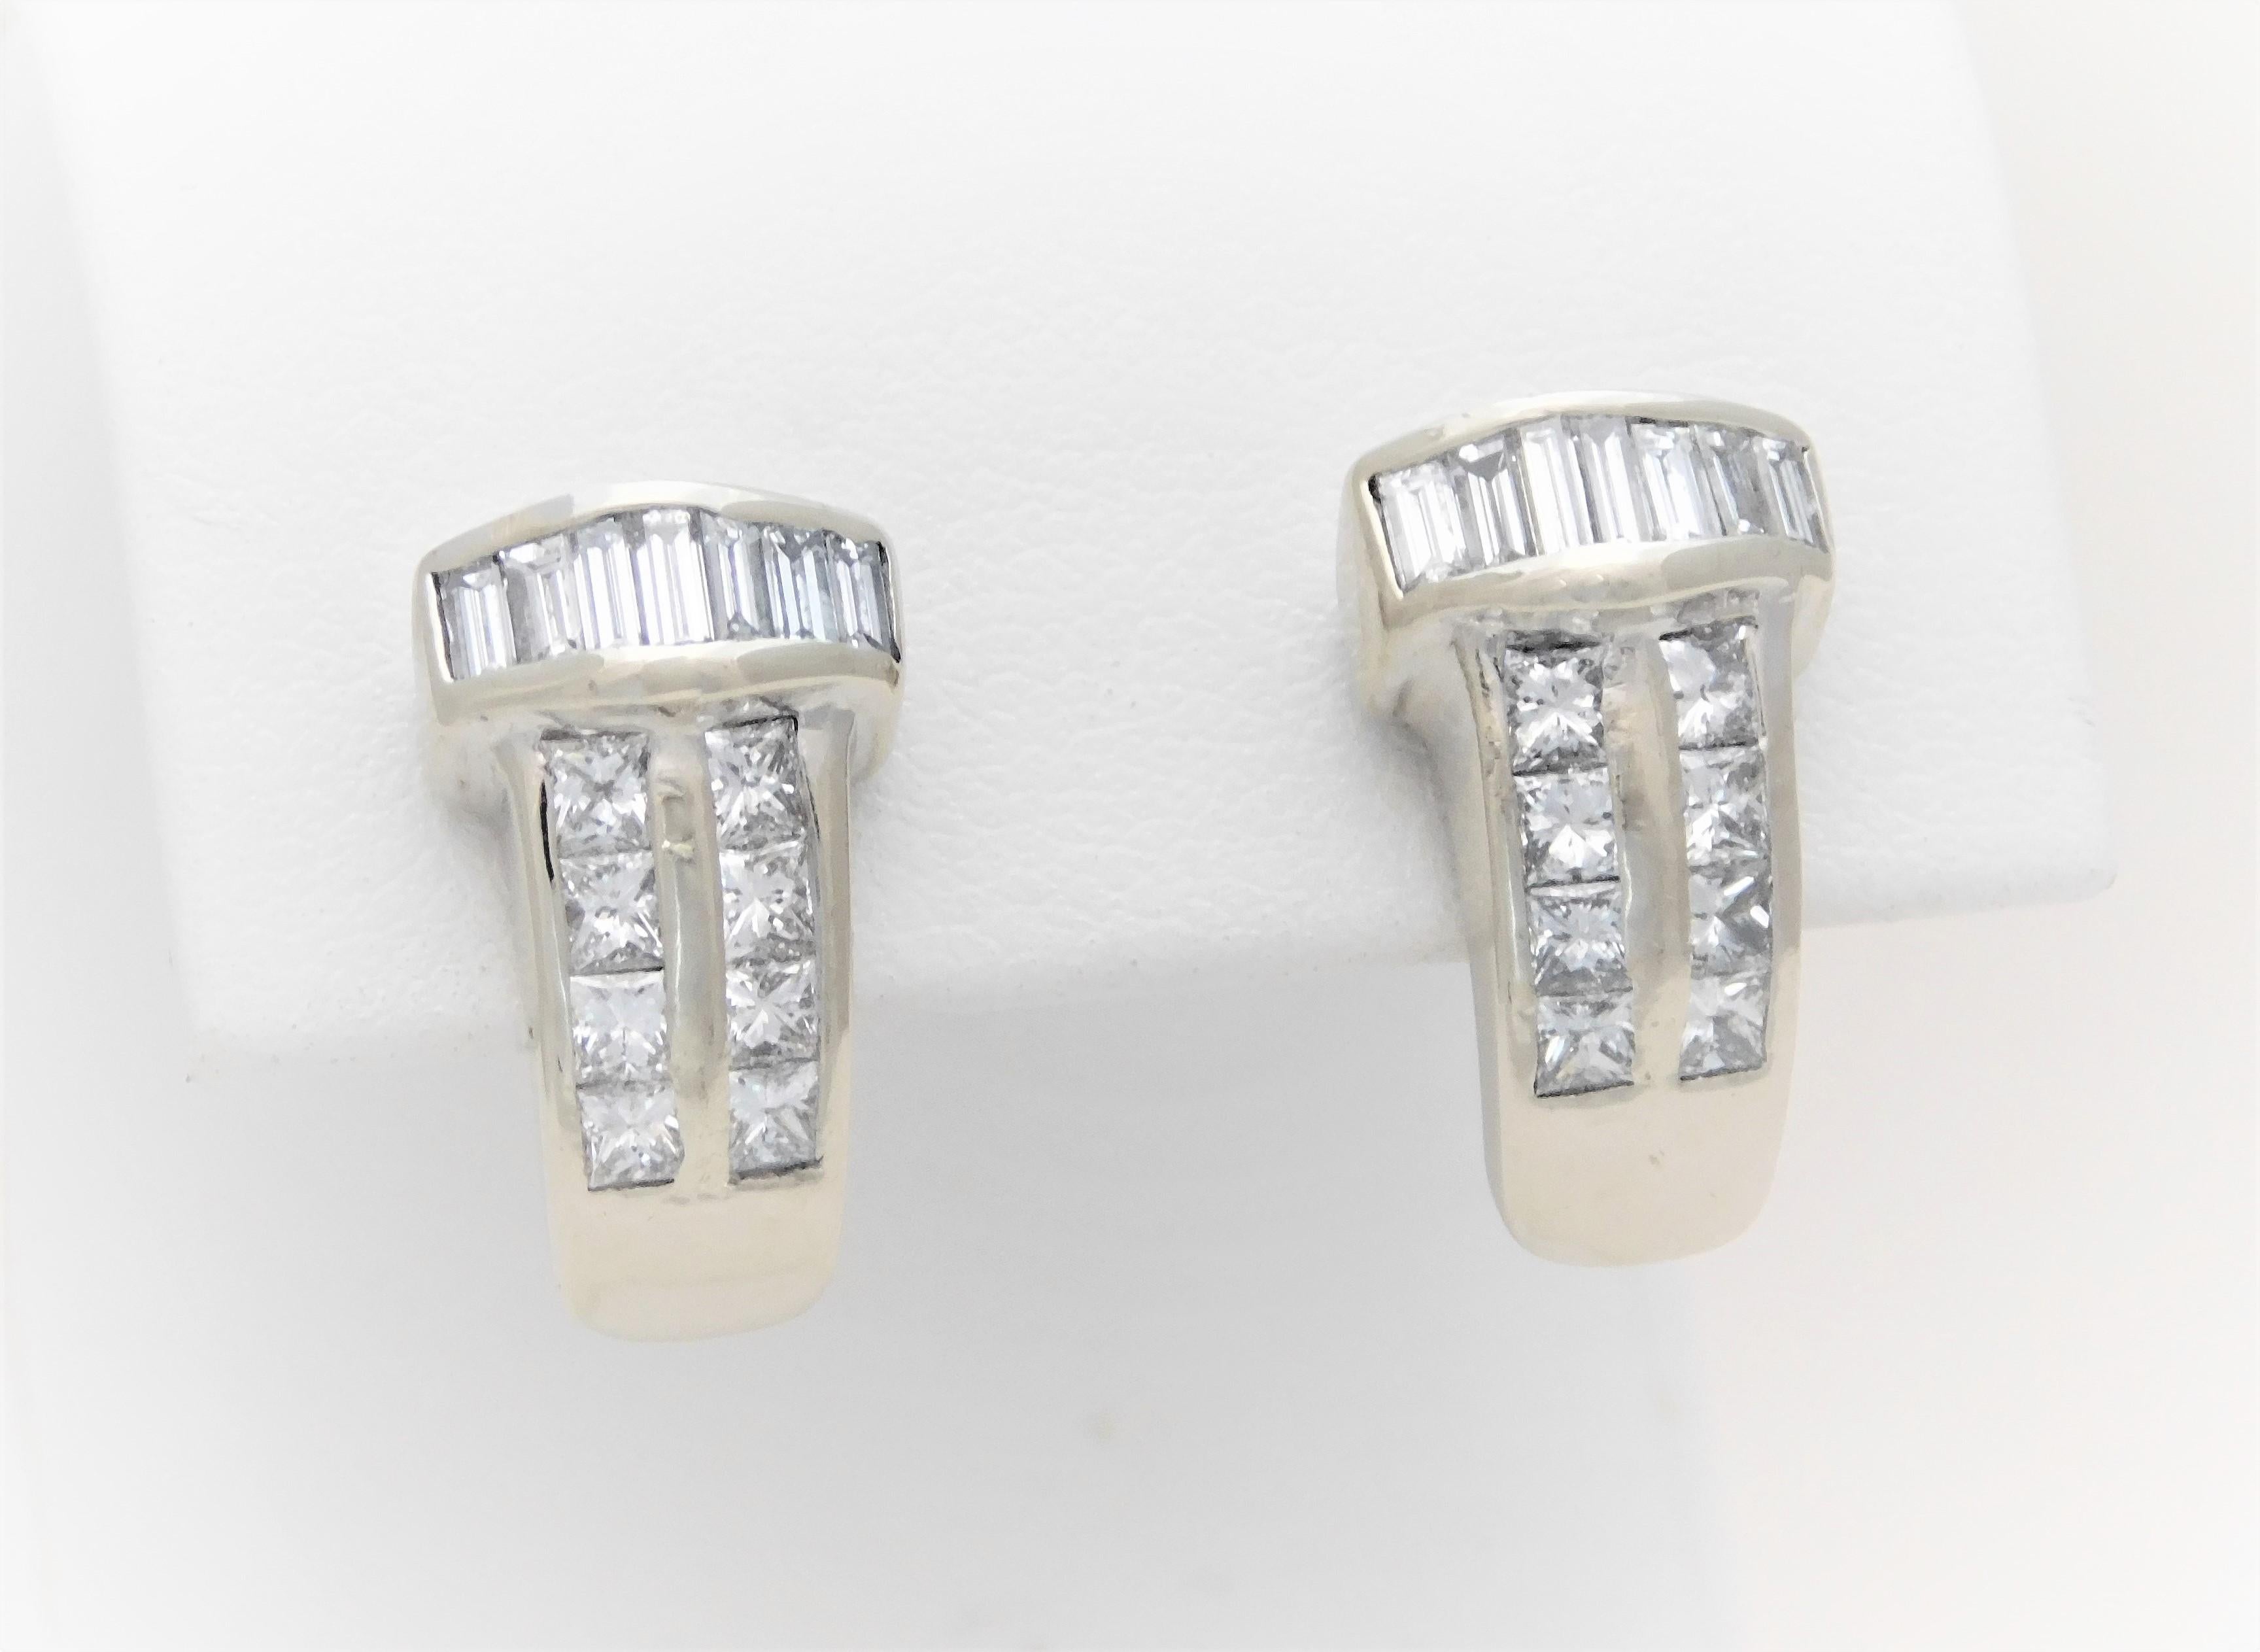   These dazzling drop-style earrings have been hand crafted in solid 14k white gold.  They, as a set, are exquisitely set with a total of 14 natural baguette cut and 16 natural princess cut diamonds approximating 1.40ct in total weight.  Every one